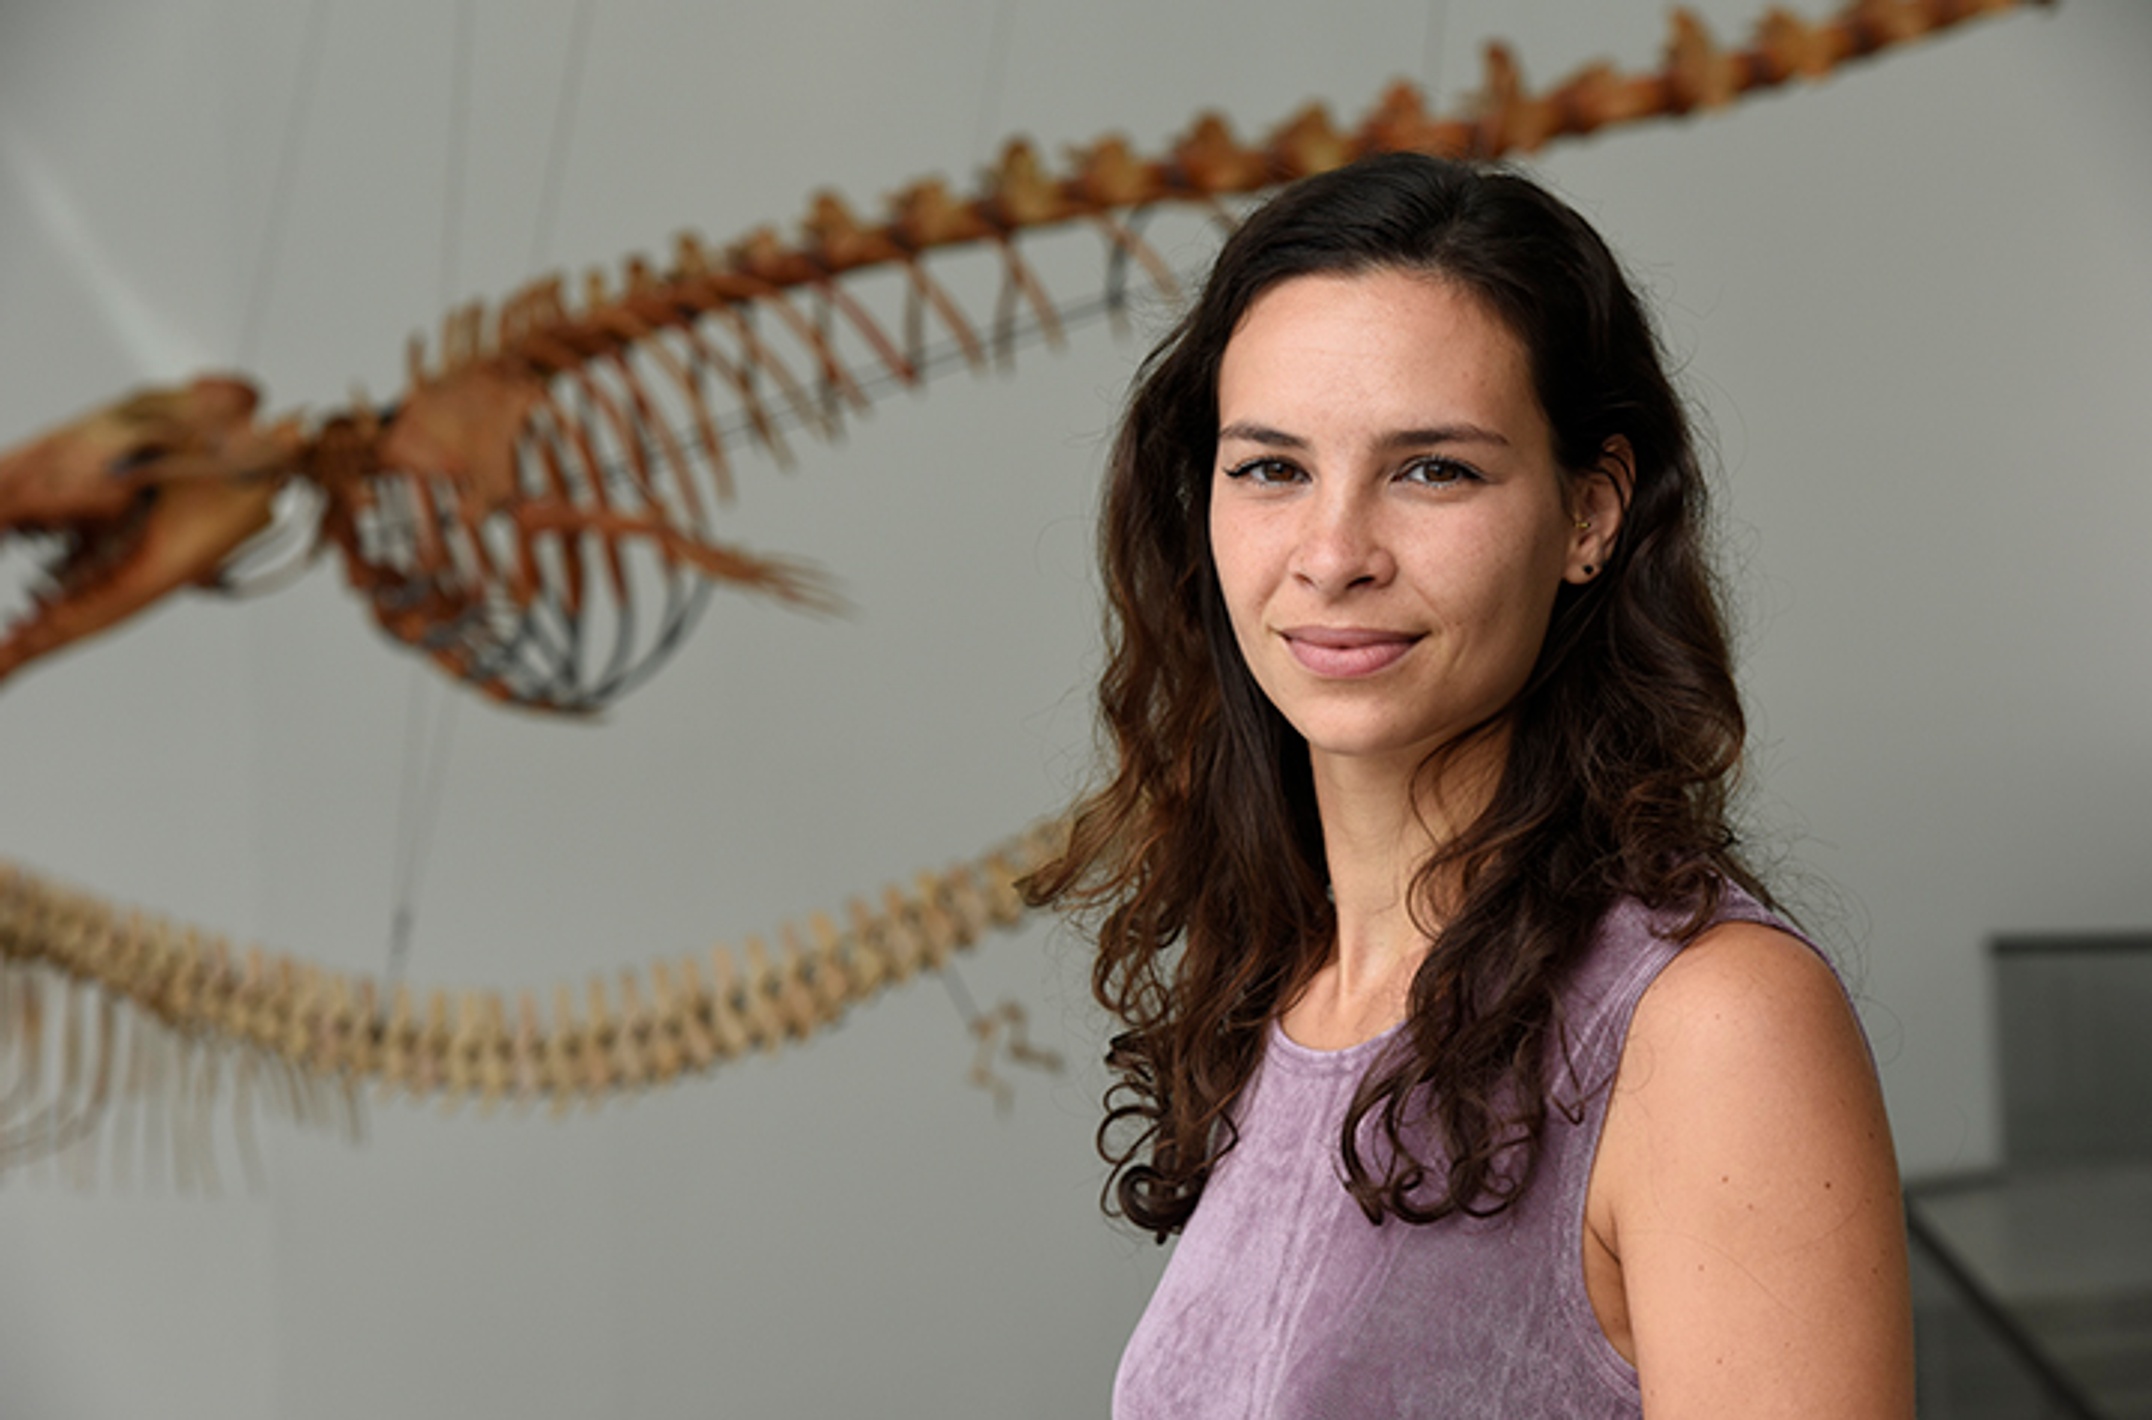 A woman posing for a photo with animal skeleton in background